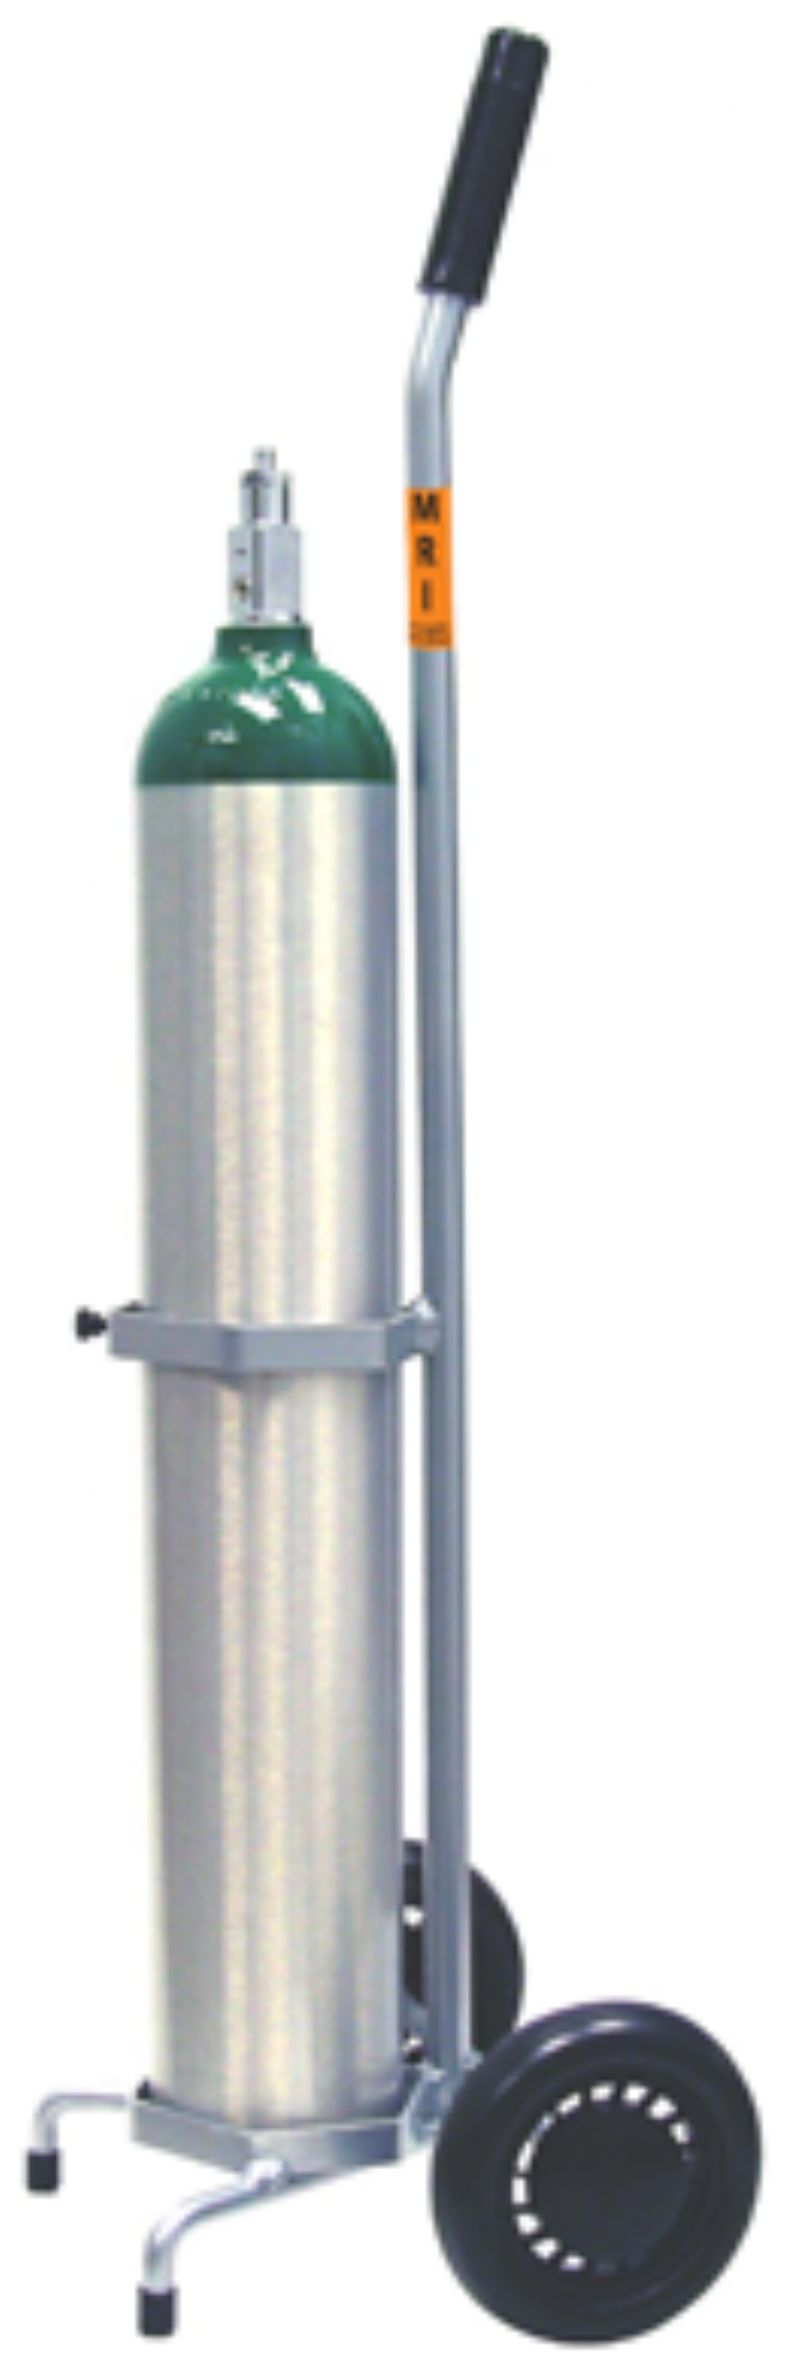 Standard Oxygen Cylinder Carts by Responsive Respiratory Picture